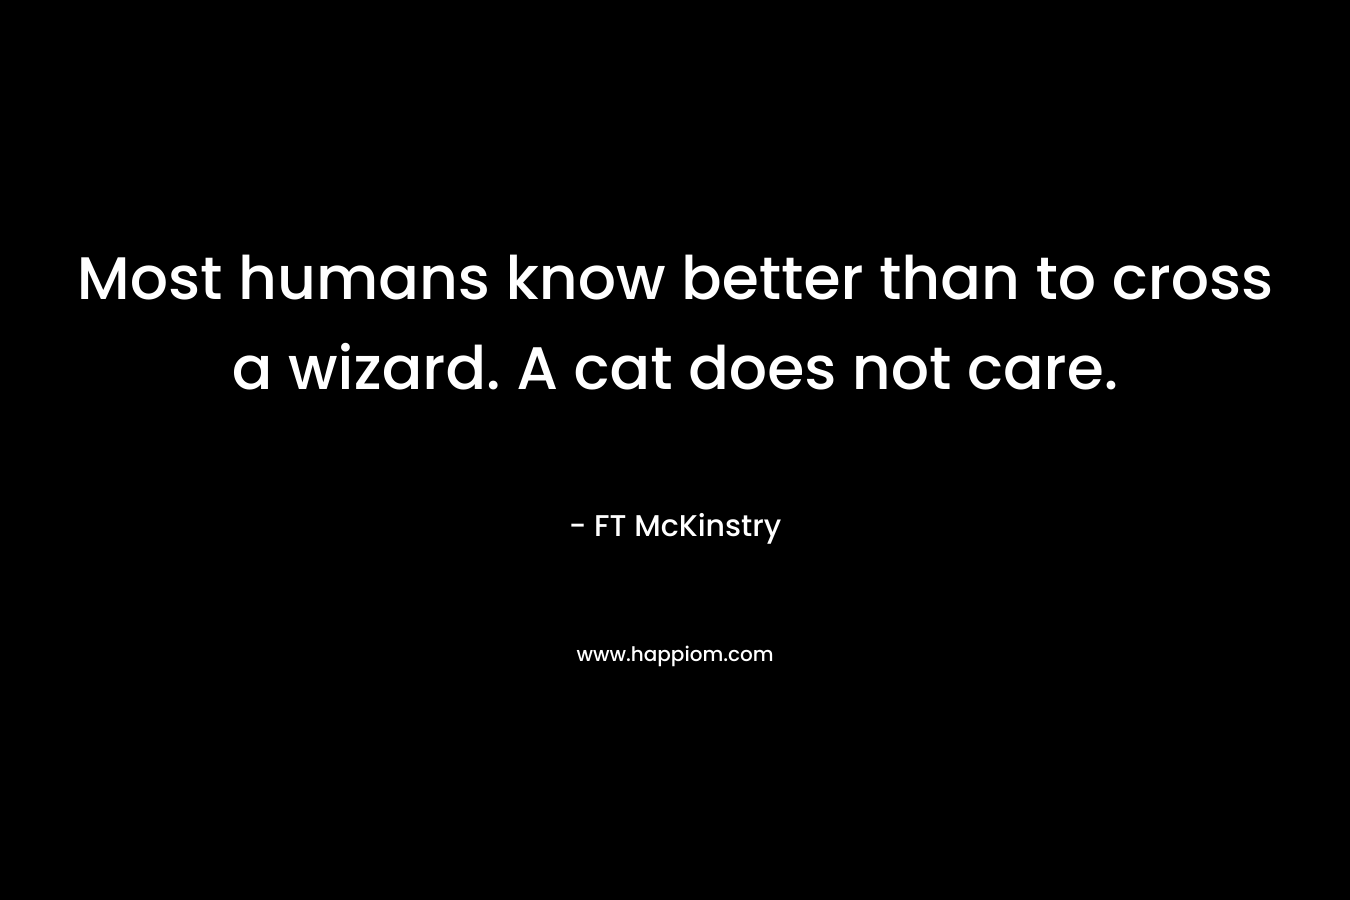 Most humans know better than to cross a wizard. A cat does not care. – FT McKinstry